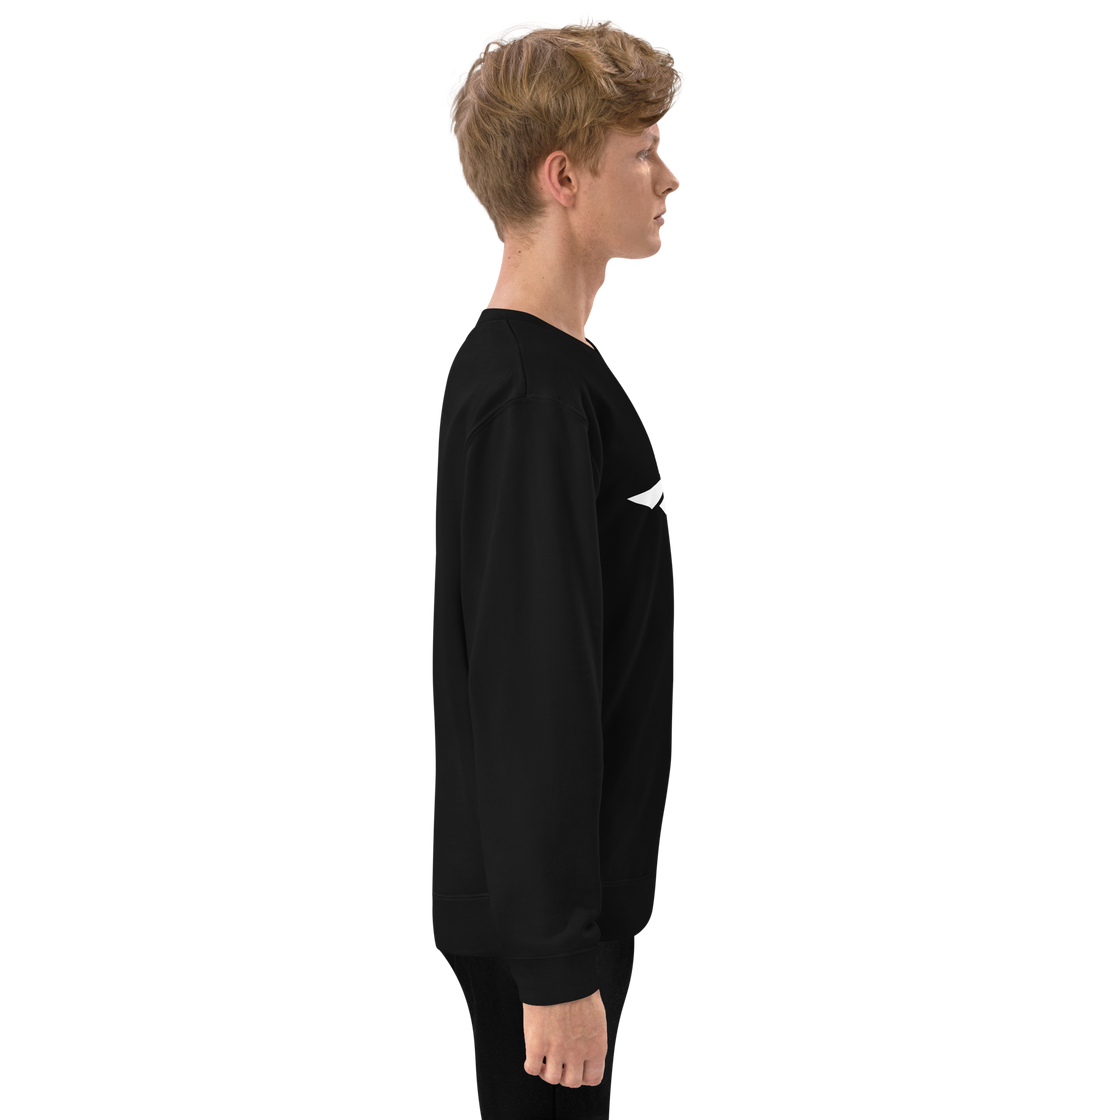 FLY³ french terry sweatshirt | Flycube